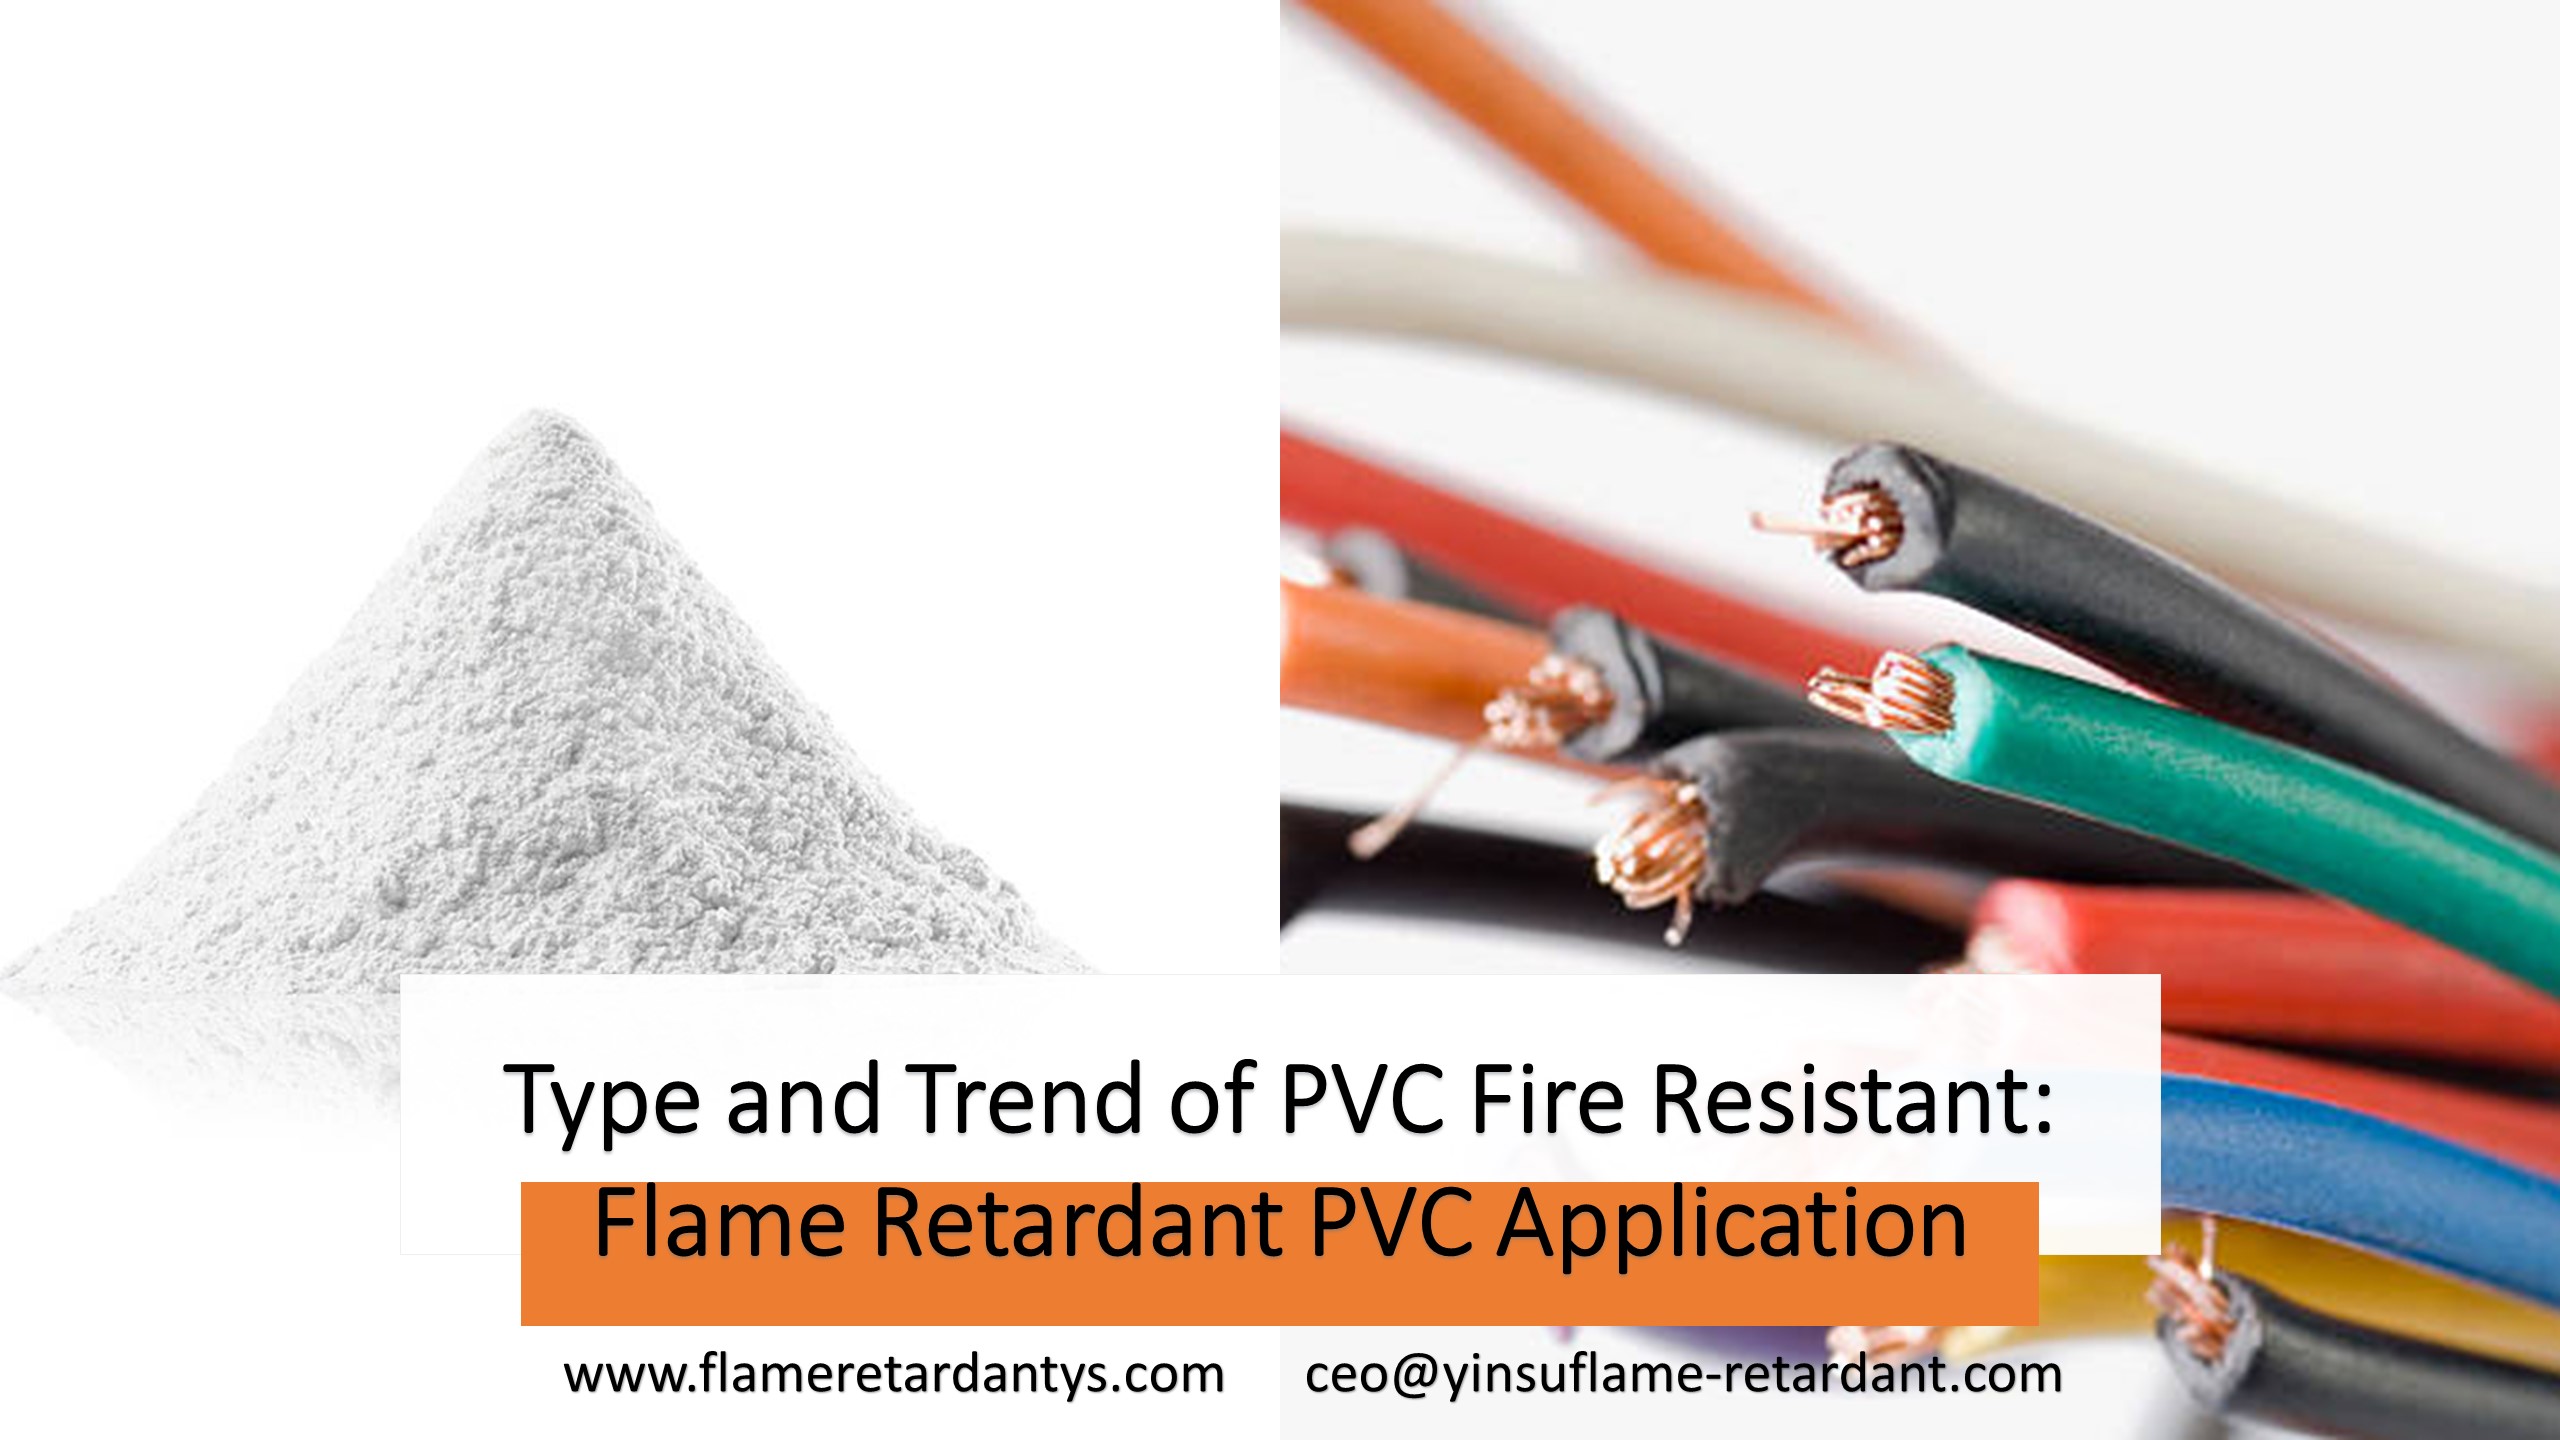 Type and Trend of PVC Fire Resistant Flame Retardant PVC Application.jpg